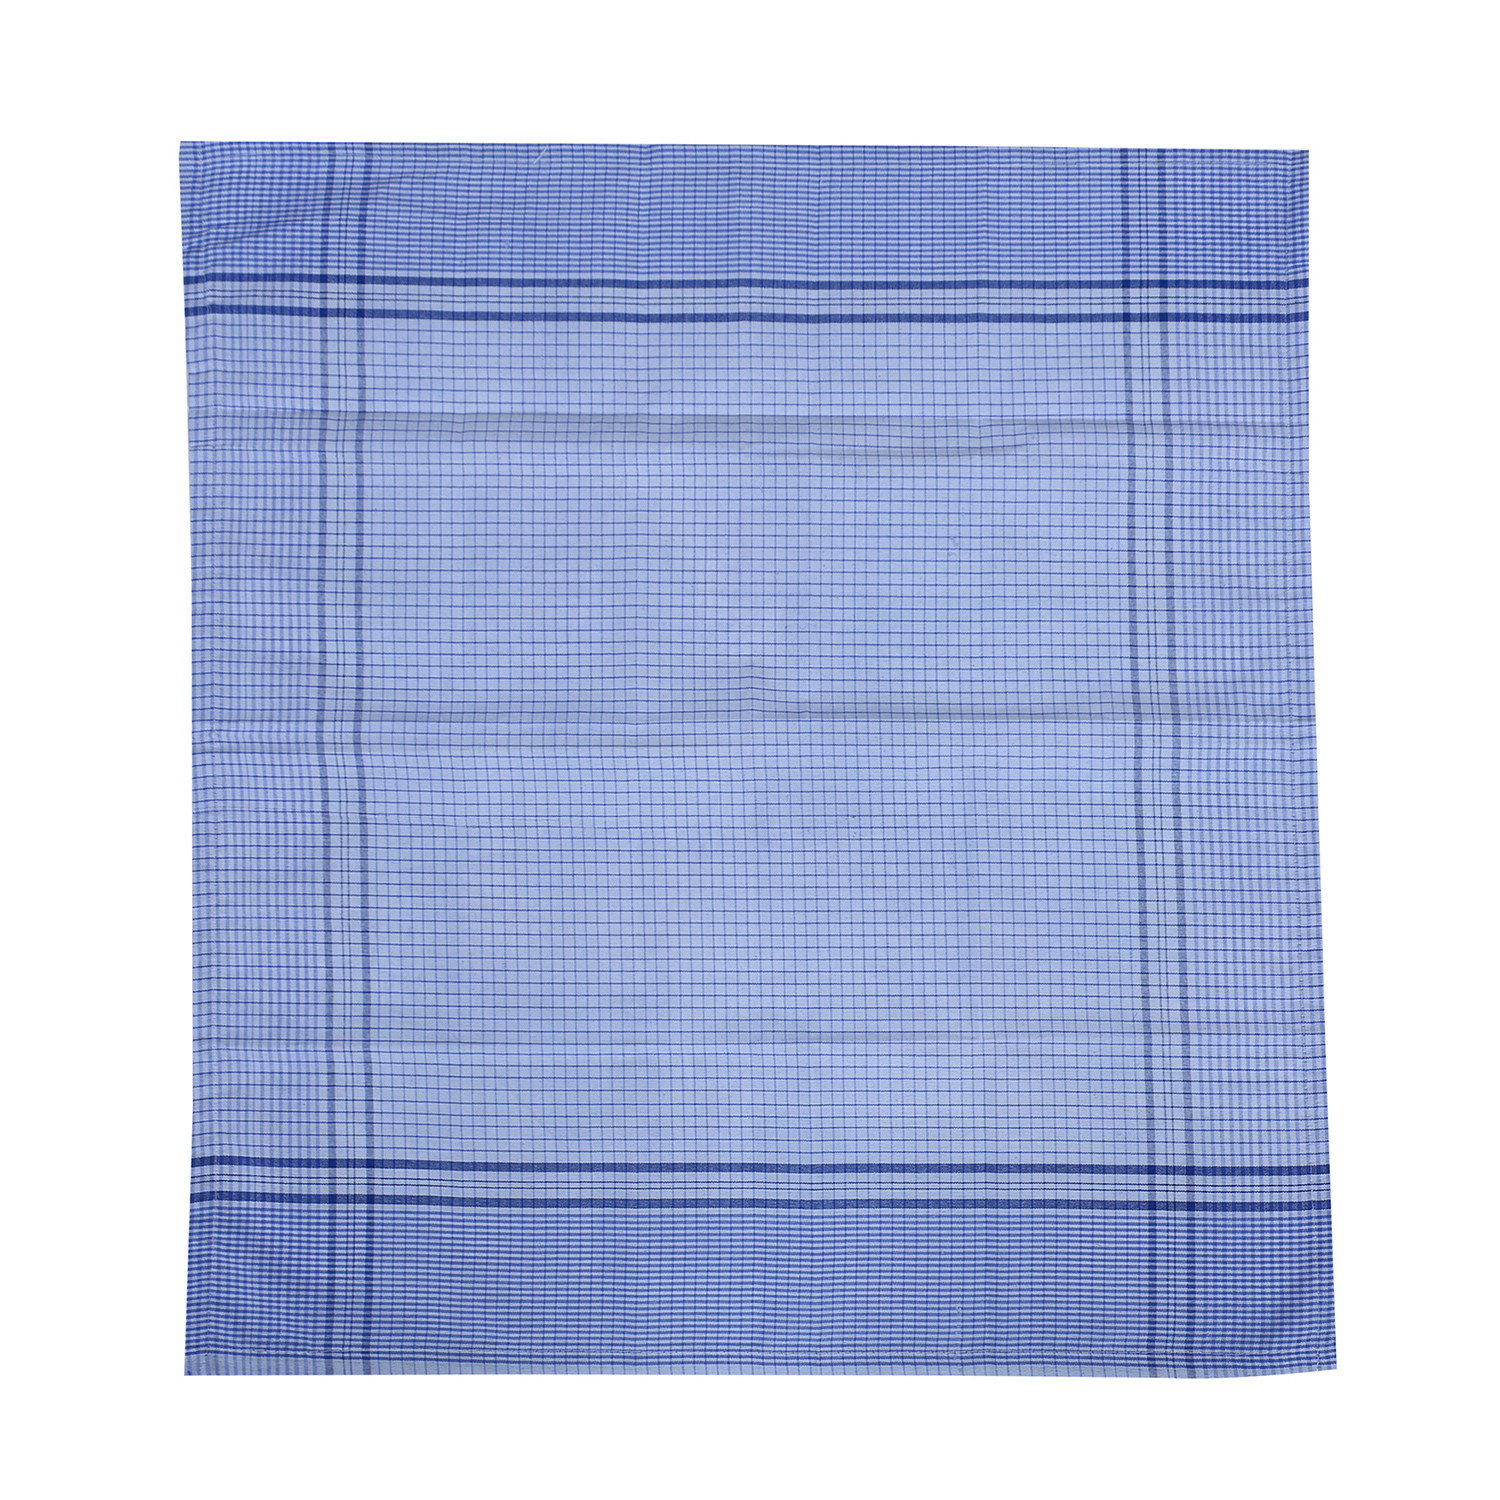 Kuber Industries Handkerchiefs | Soft Cotton | Hankies for Mans | Hankies for Boys | Small Check | Rumal for Mans | Boys | Wicking Sweat | Set of 12 | Multi